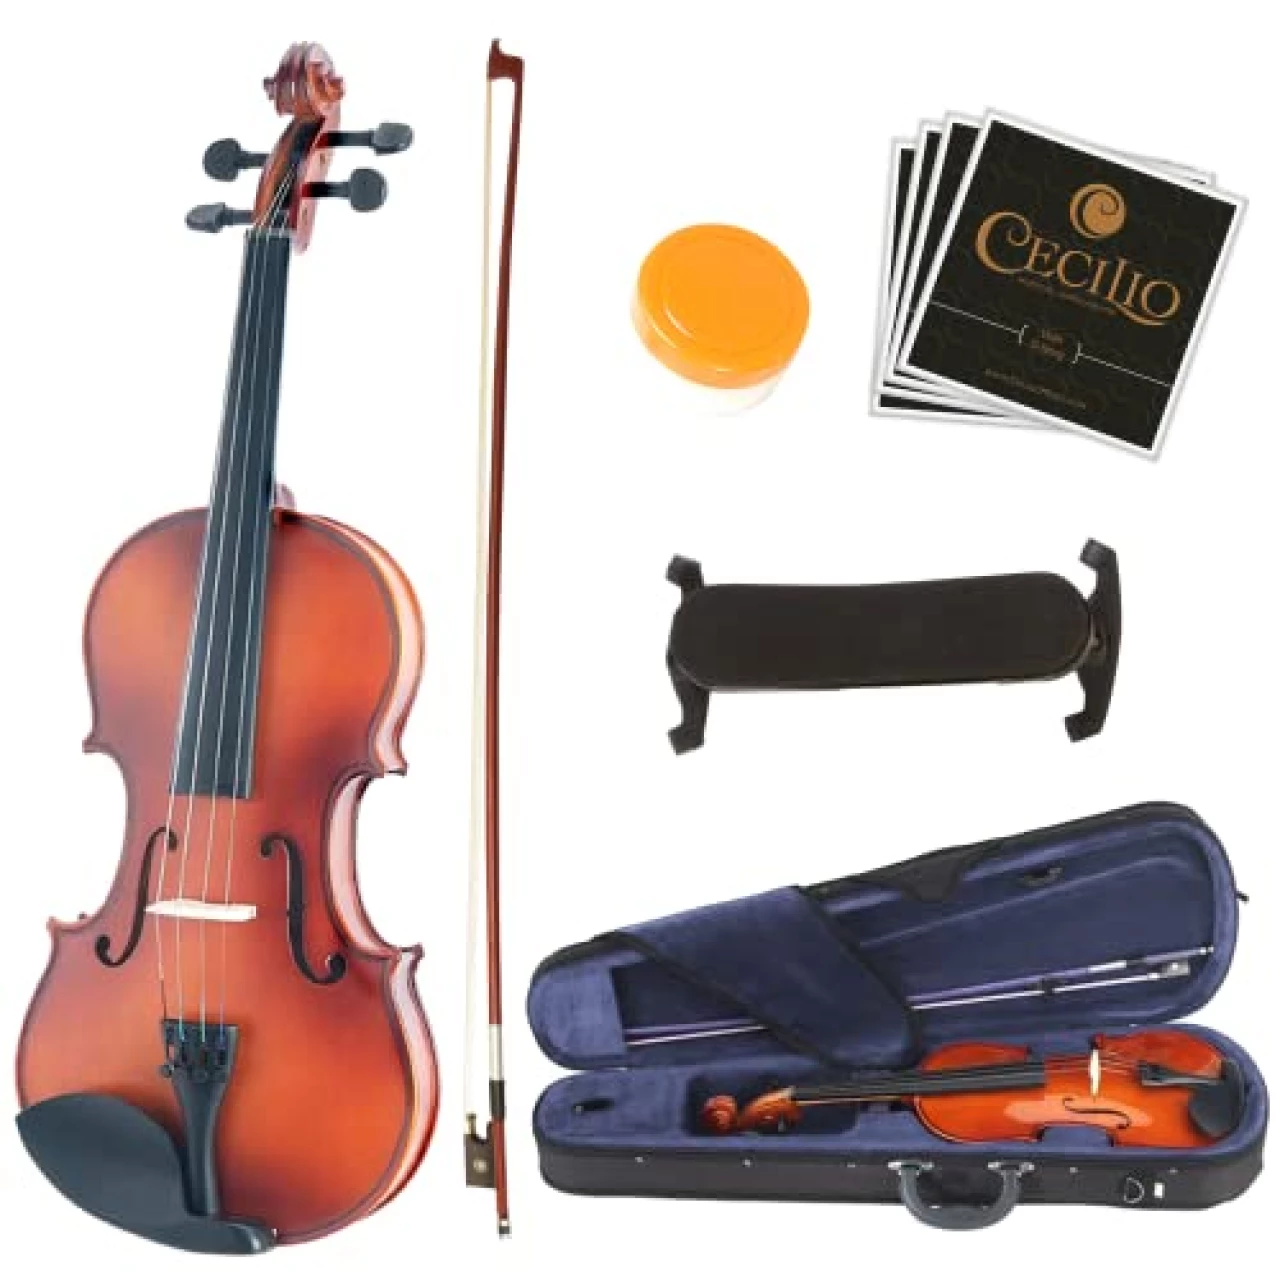 Mendini By Cecilio Violin For Beginners, Kids &amp; Adults - Beginner Kit For Student w/Hard Case, Rosin, Bow